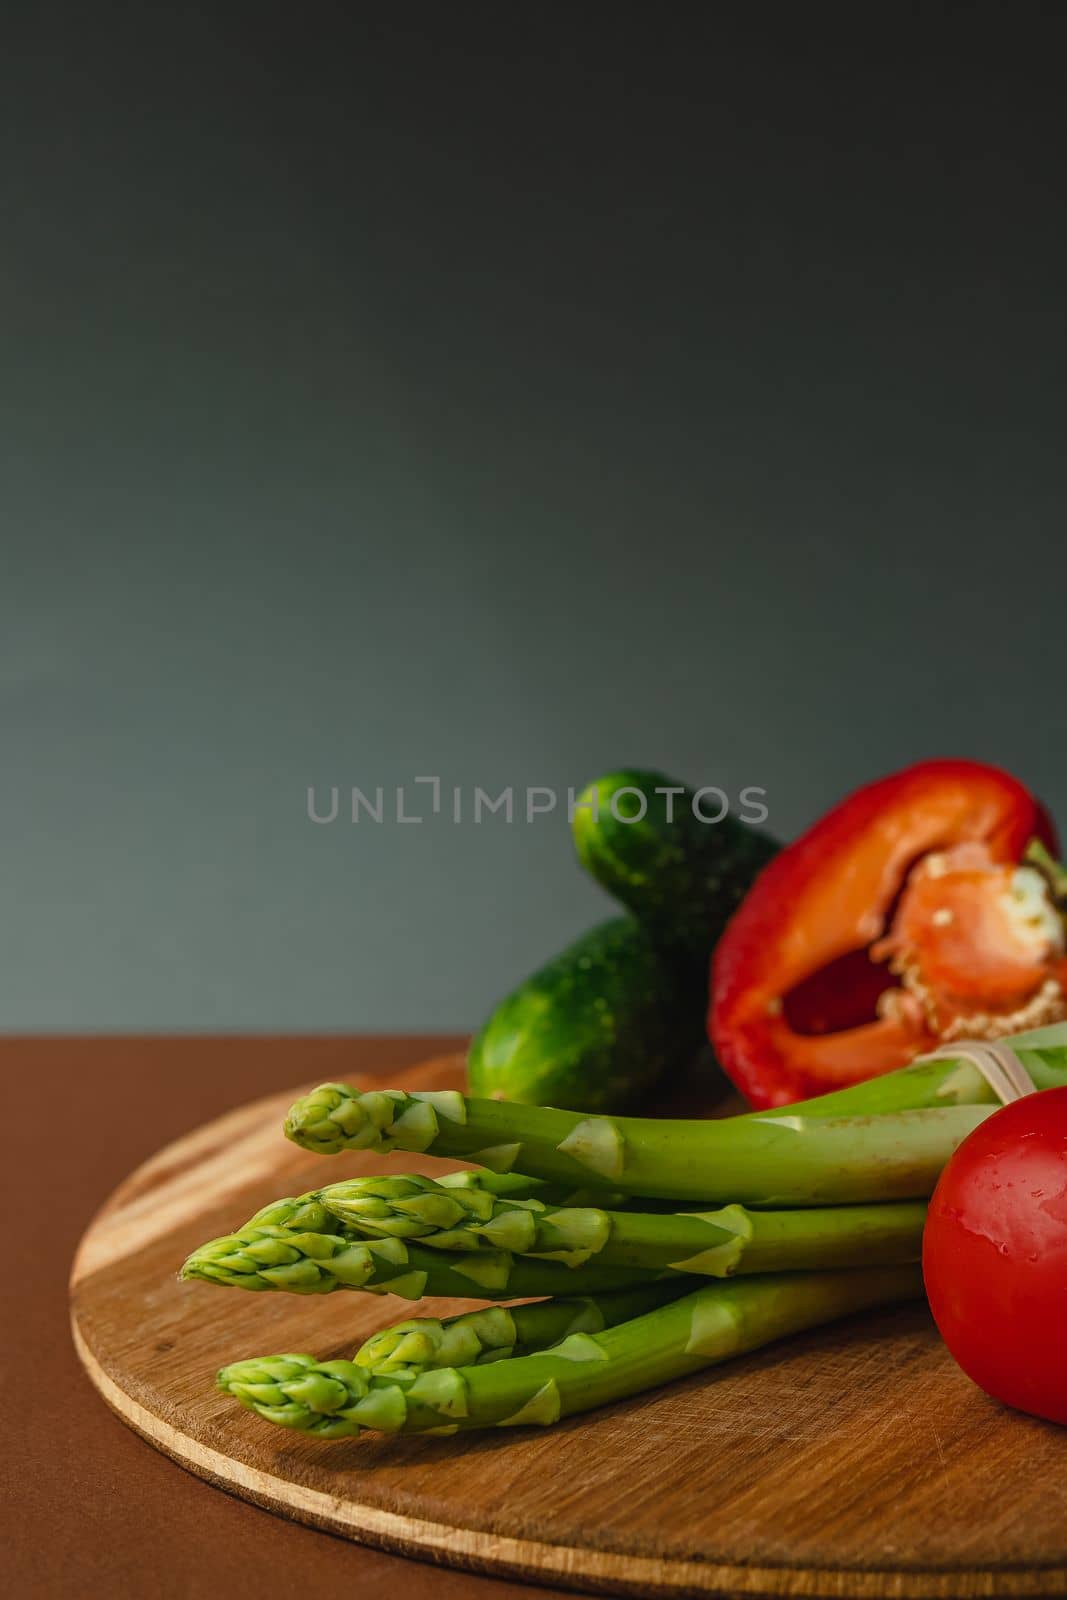 Vegetables lie on a wooden board: tomatoes, asparagus, cucumbers, red bell peppers. brown, dark gray background. place for text